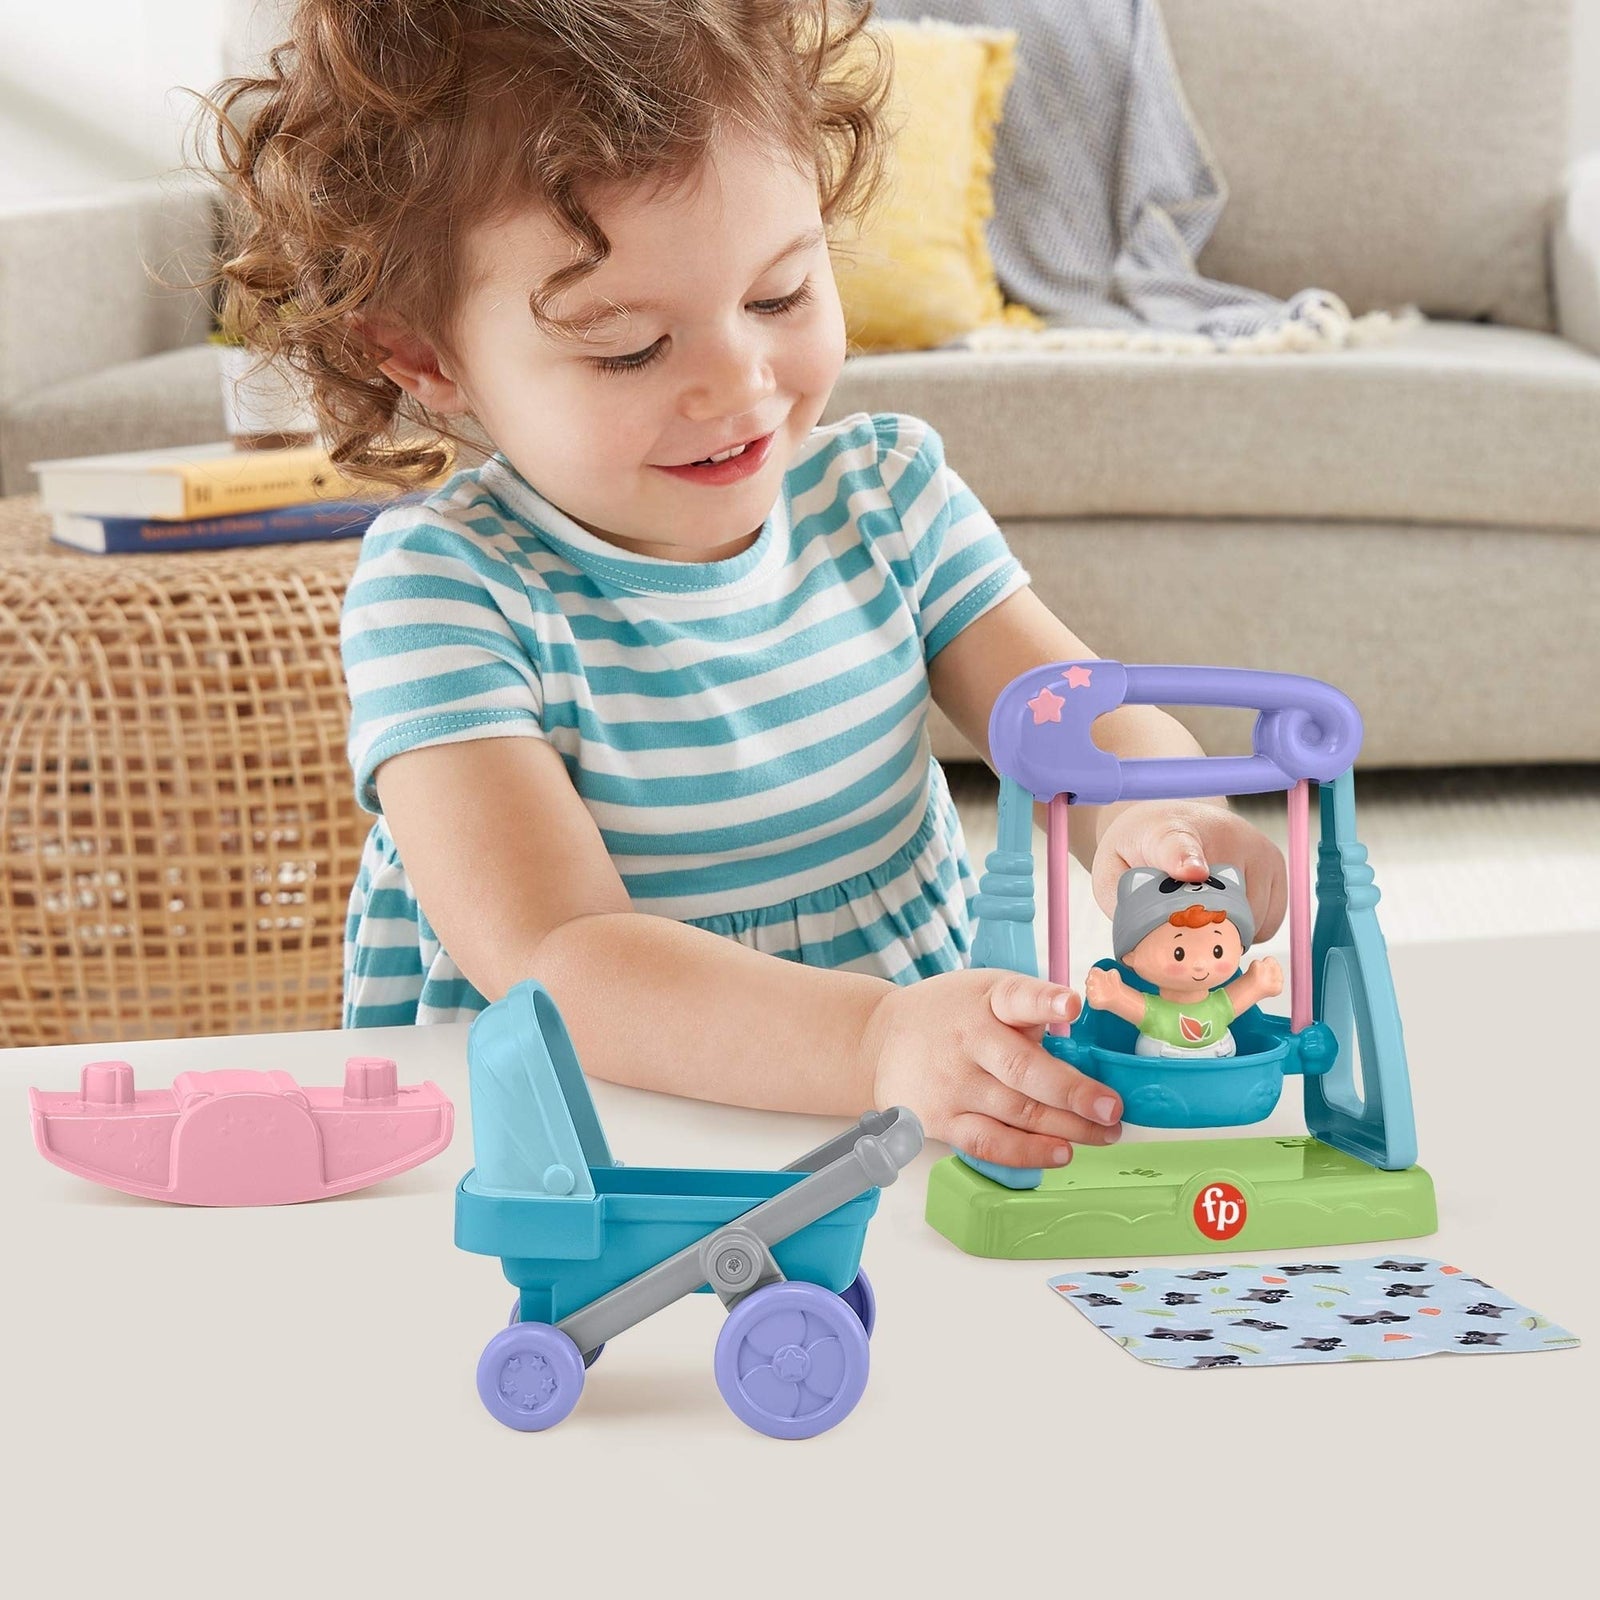 Fisher-Price Little People Swing & Stroll Babies Play Set with Figure and Pretend Outdoor Toys for Toddlers and Preschool Kids